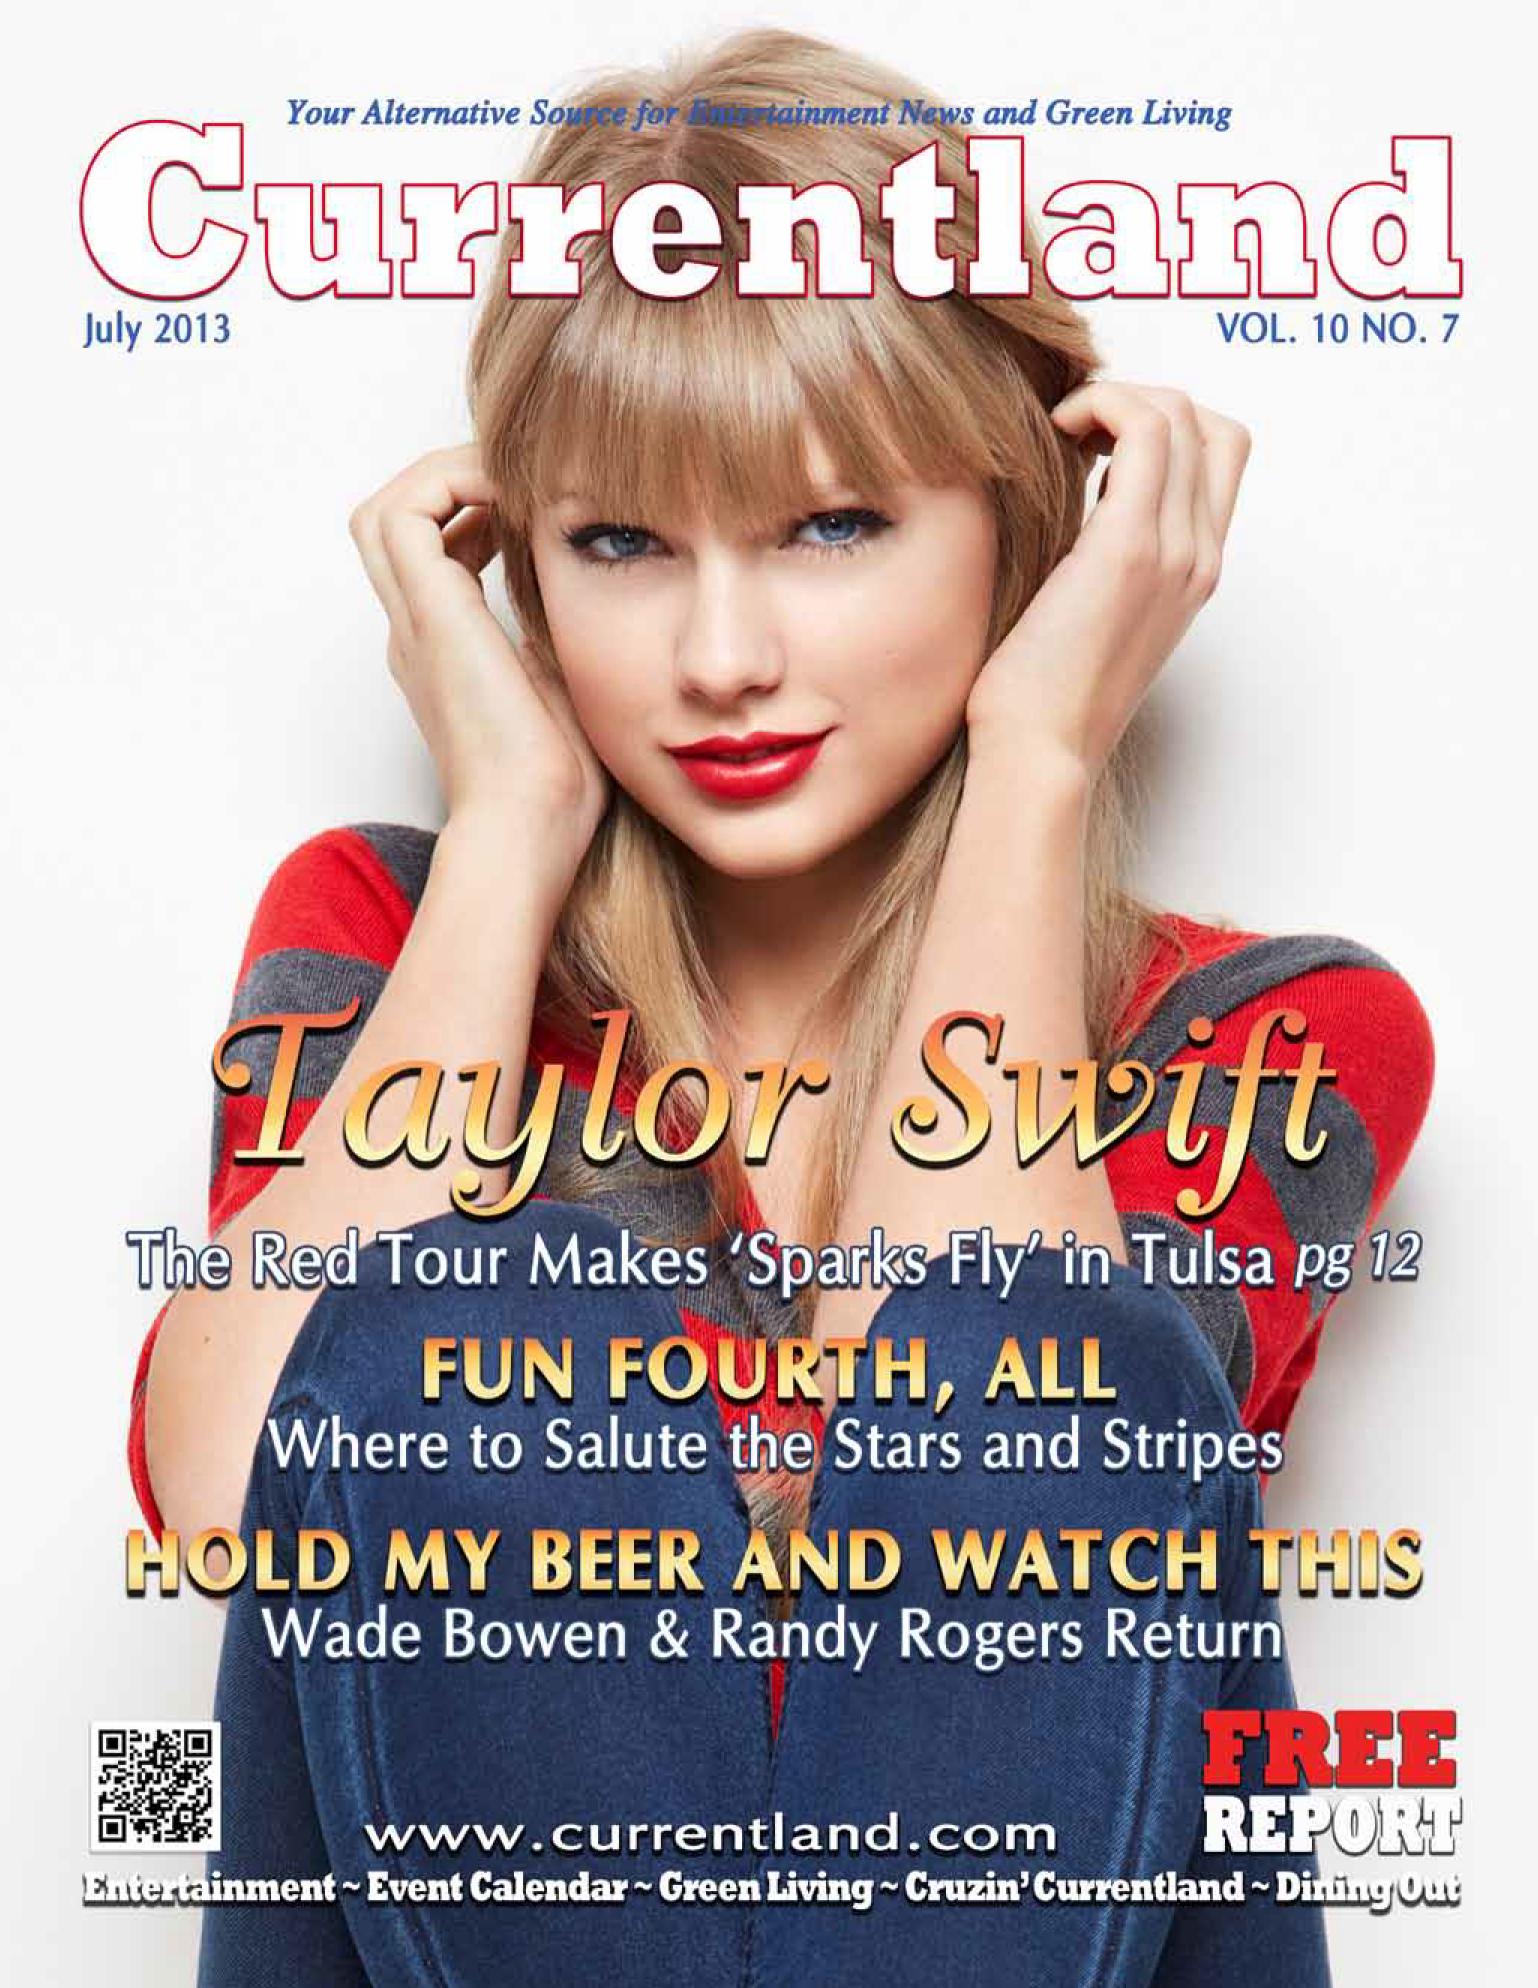 http://www.taylorpictures.net/albums/scans/2013/currentland/001.jpg